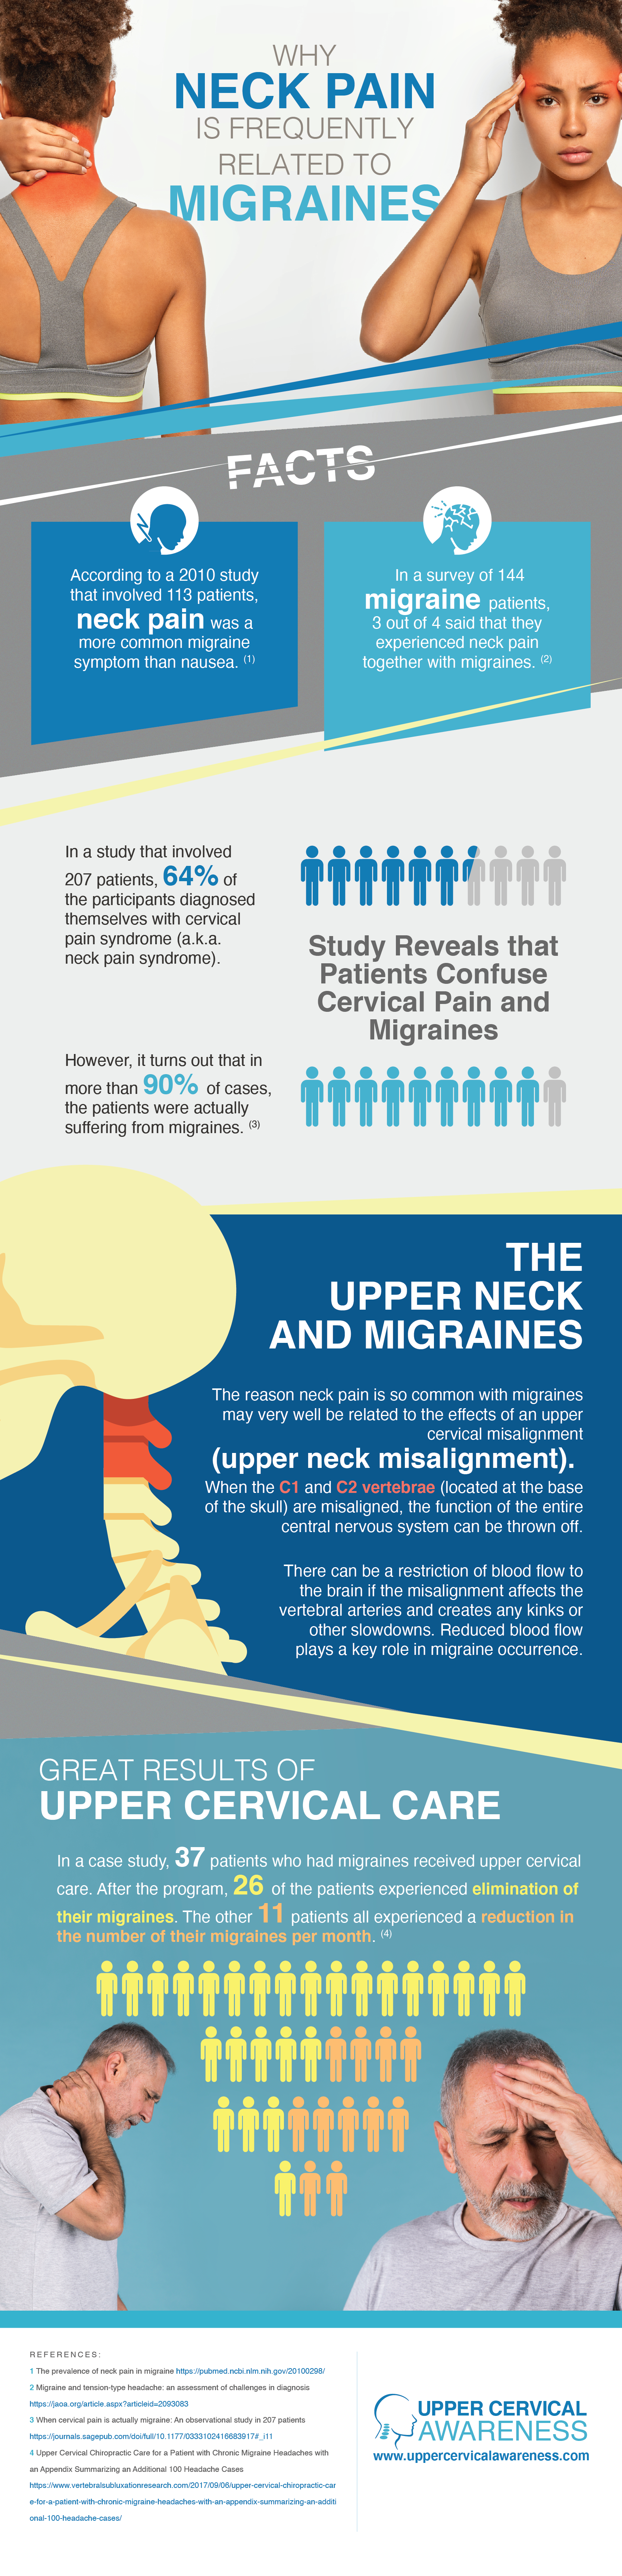 Why Neck Pain Is Frequently Related to Migraines